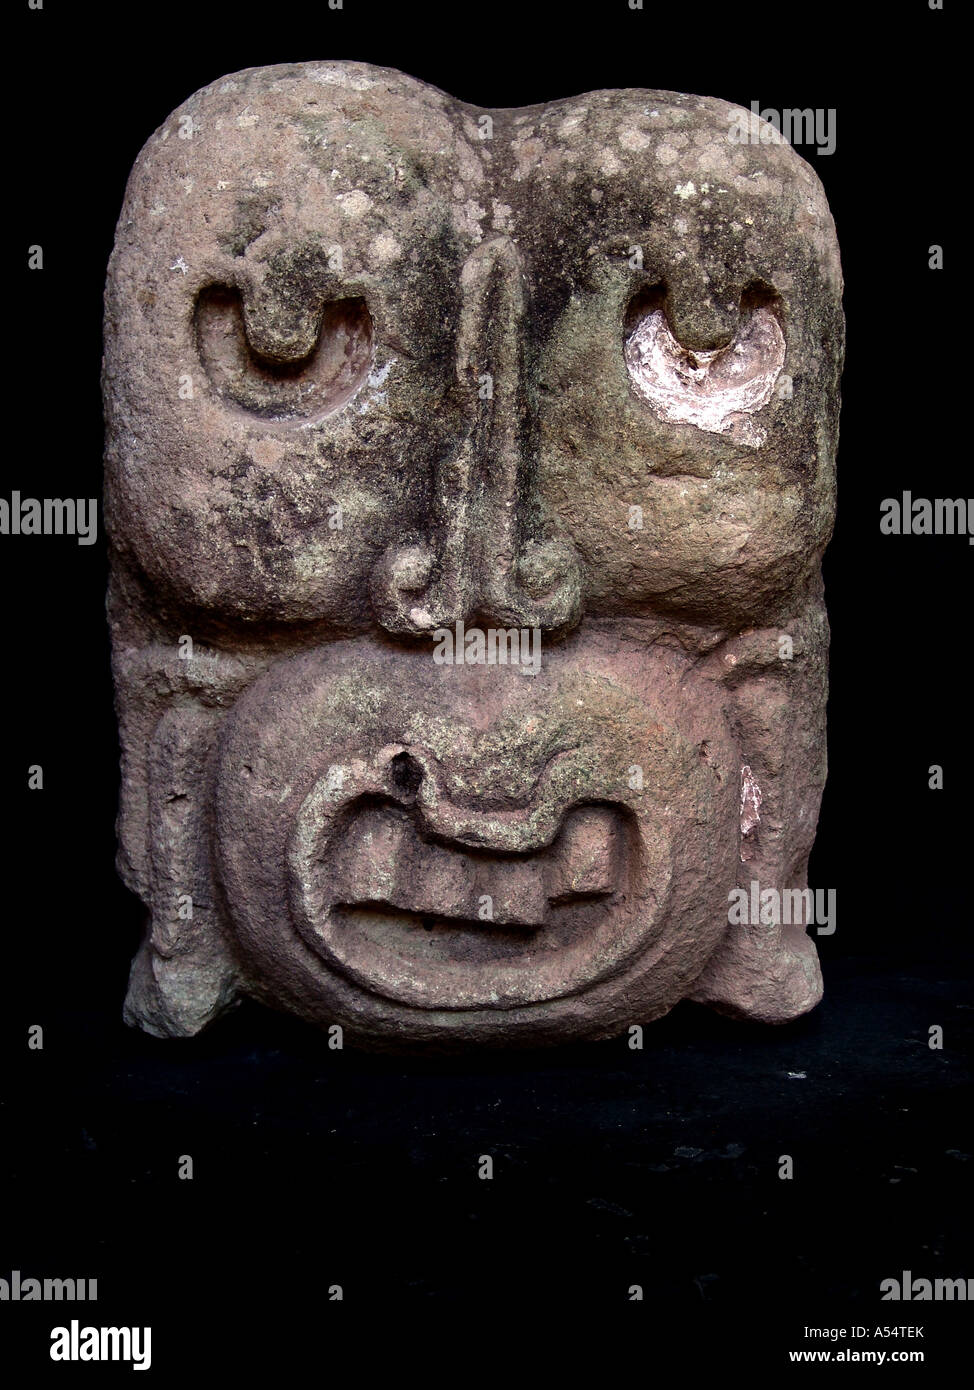 Painet ip1957 honduras stone head copan mayan ruins country developing nation less economically developed culture emerging Stock Photo